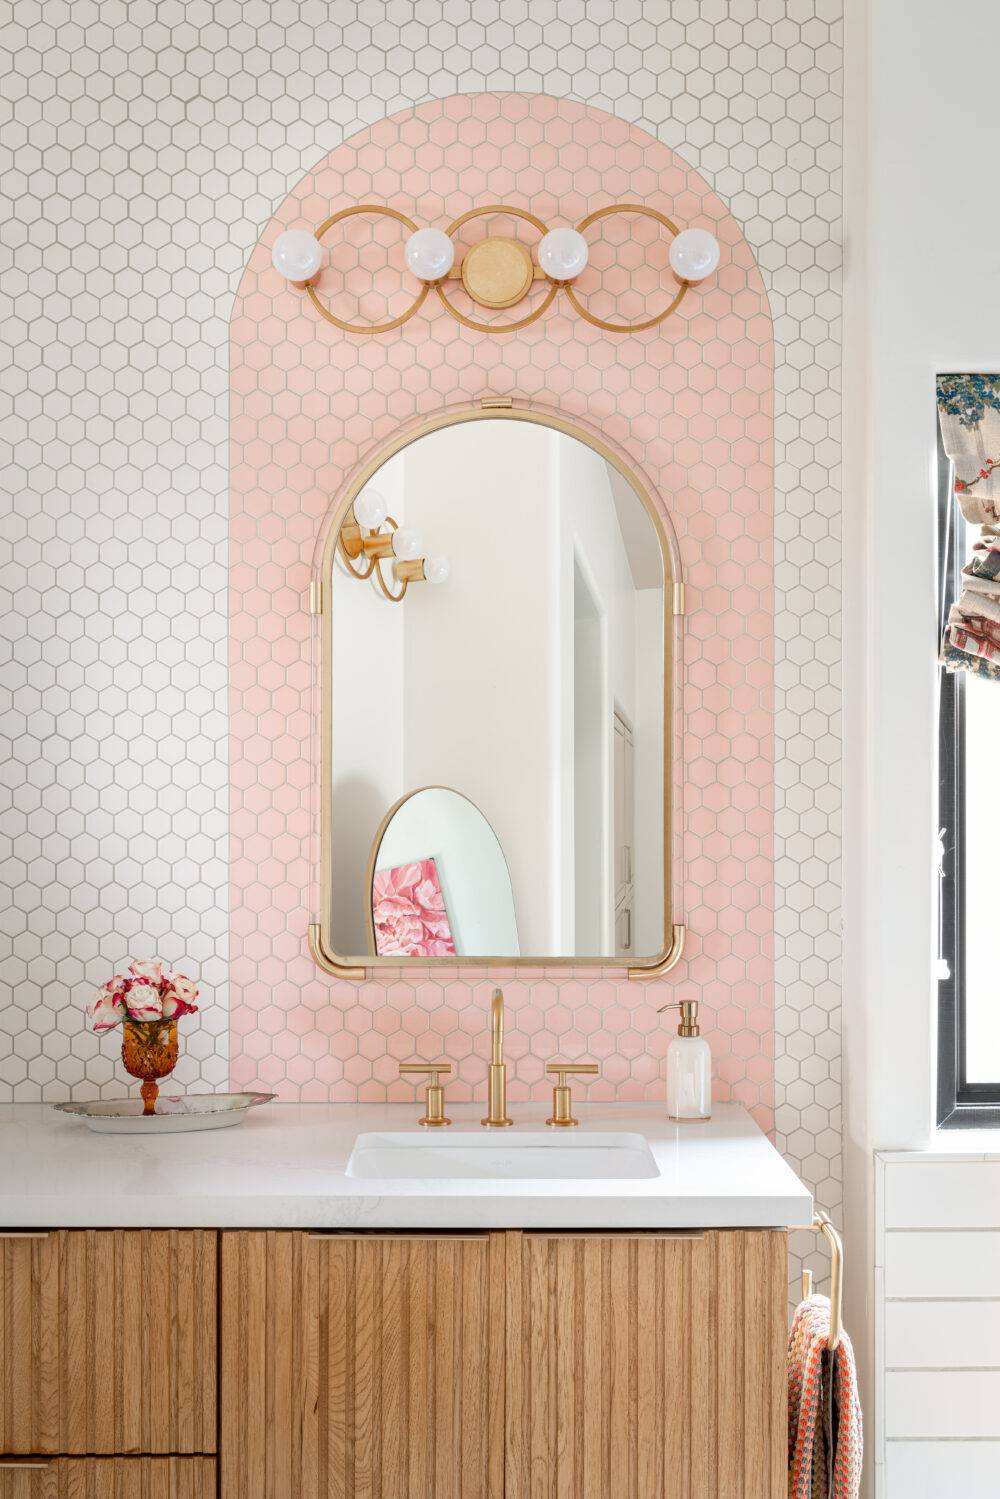 Bathroom with a white and pink tiled backsplash.